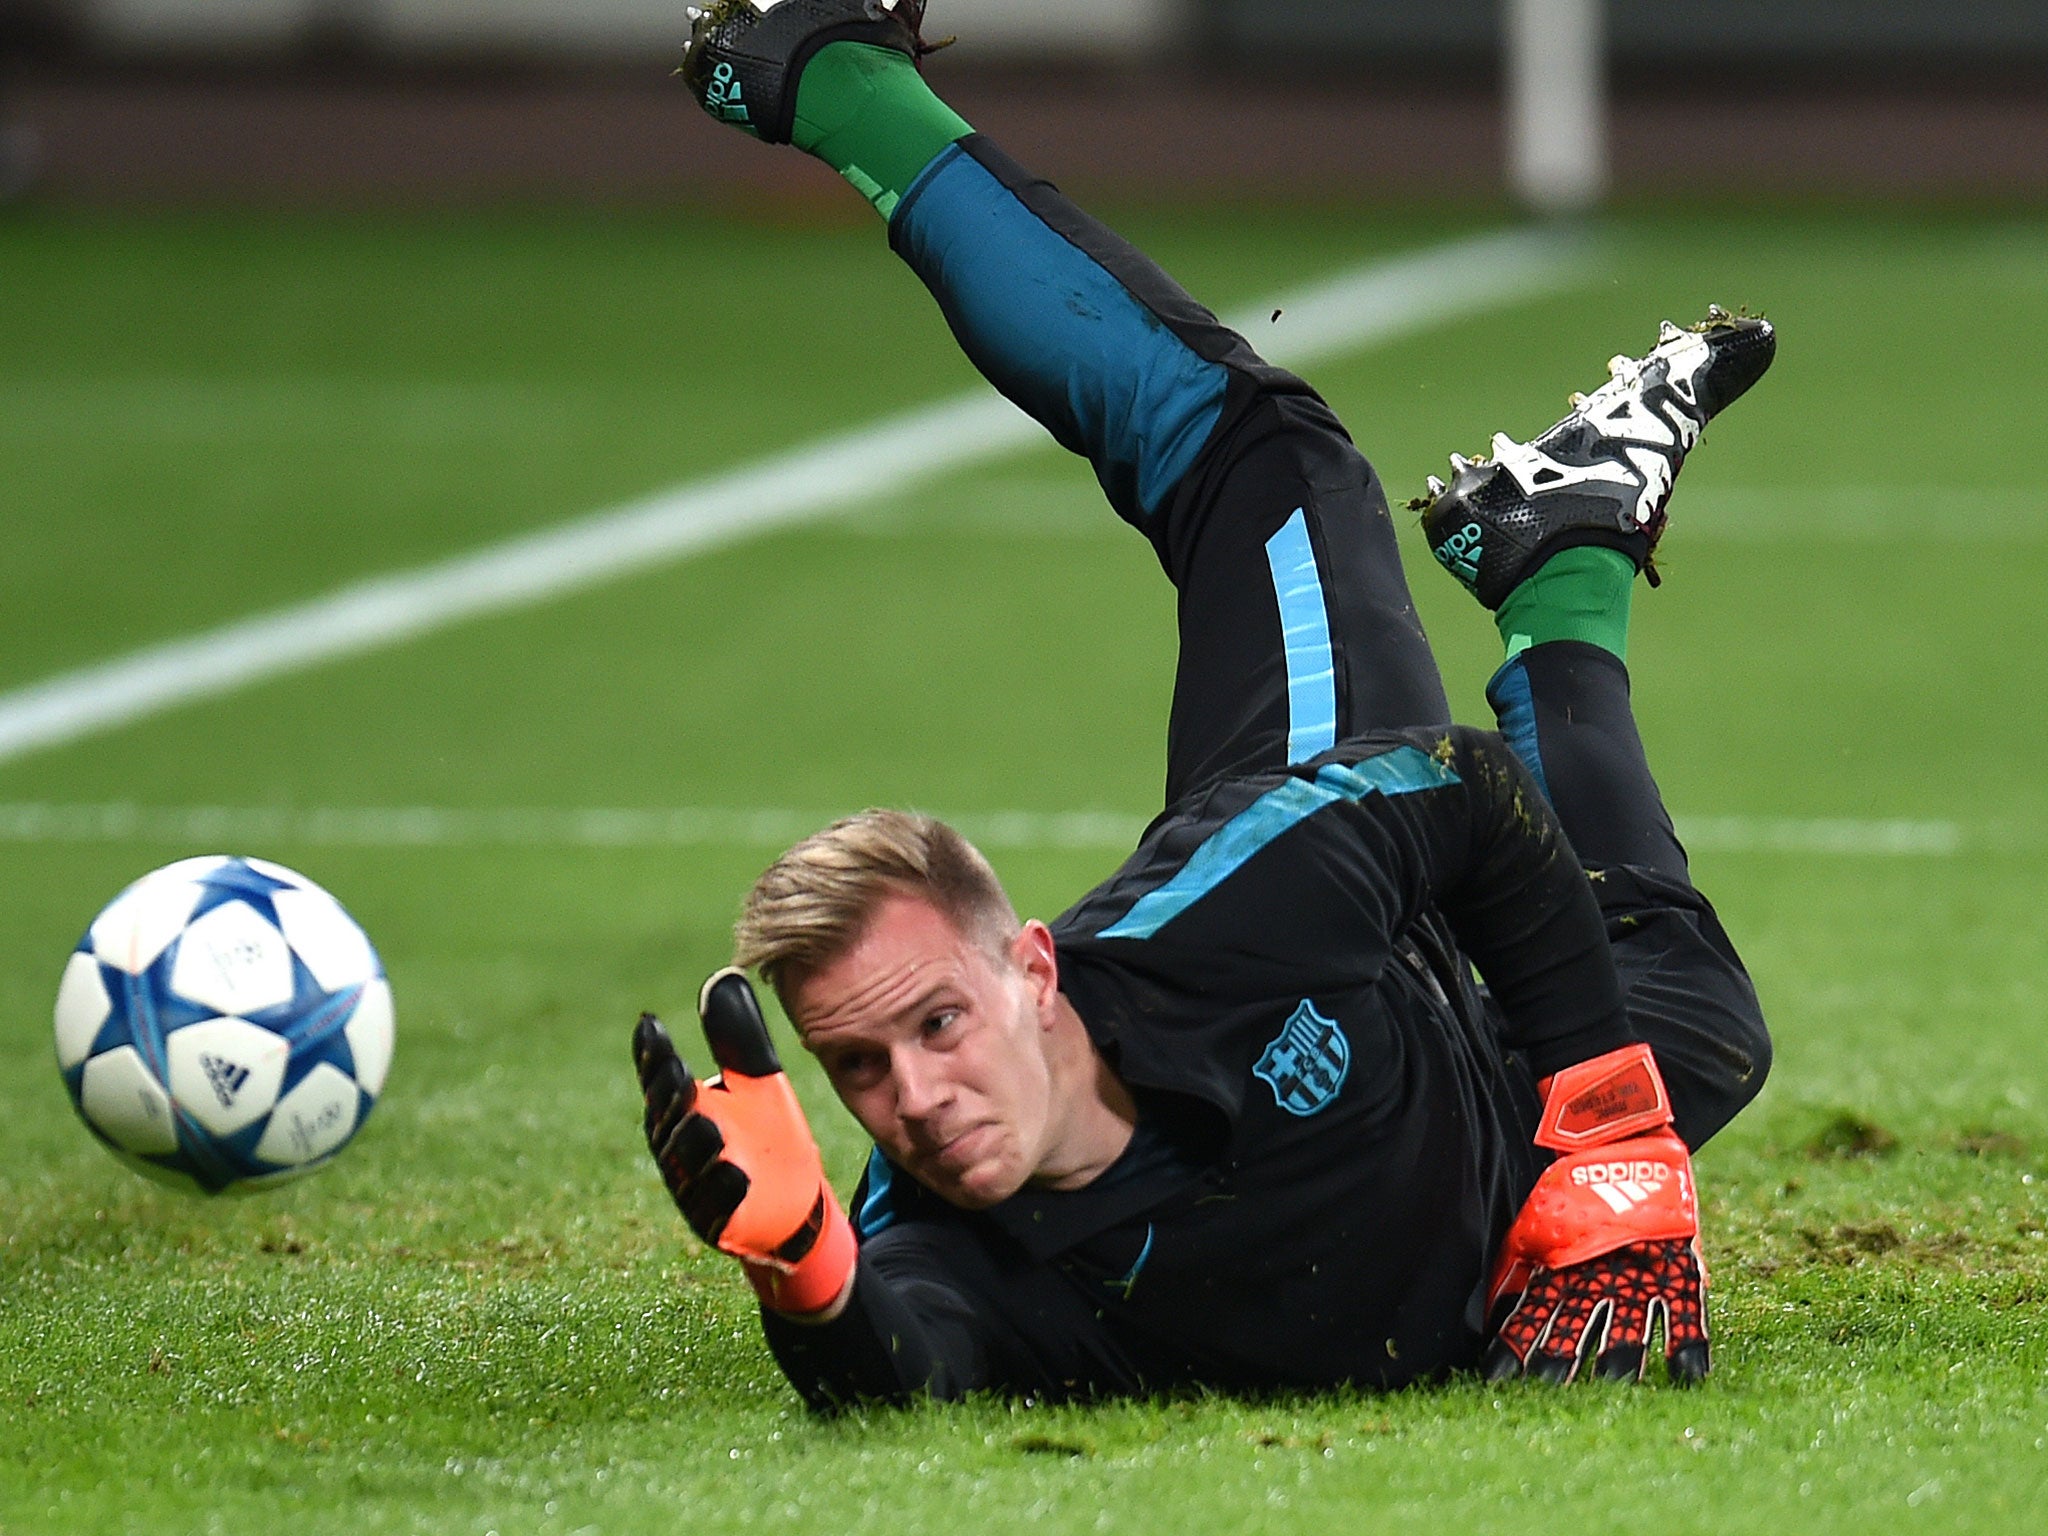 Marc-Andre ter Stegen is said to be considering his future at Barcelona